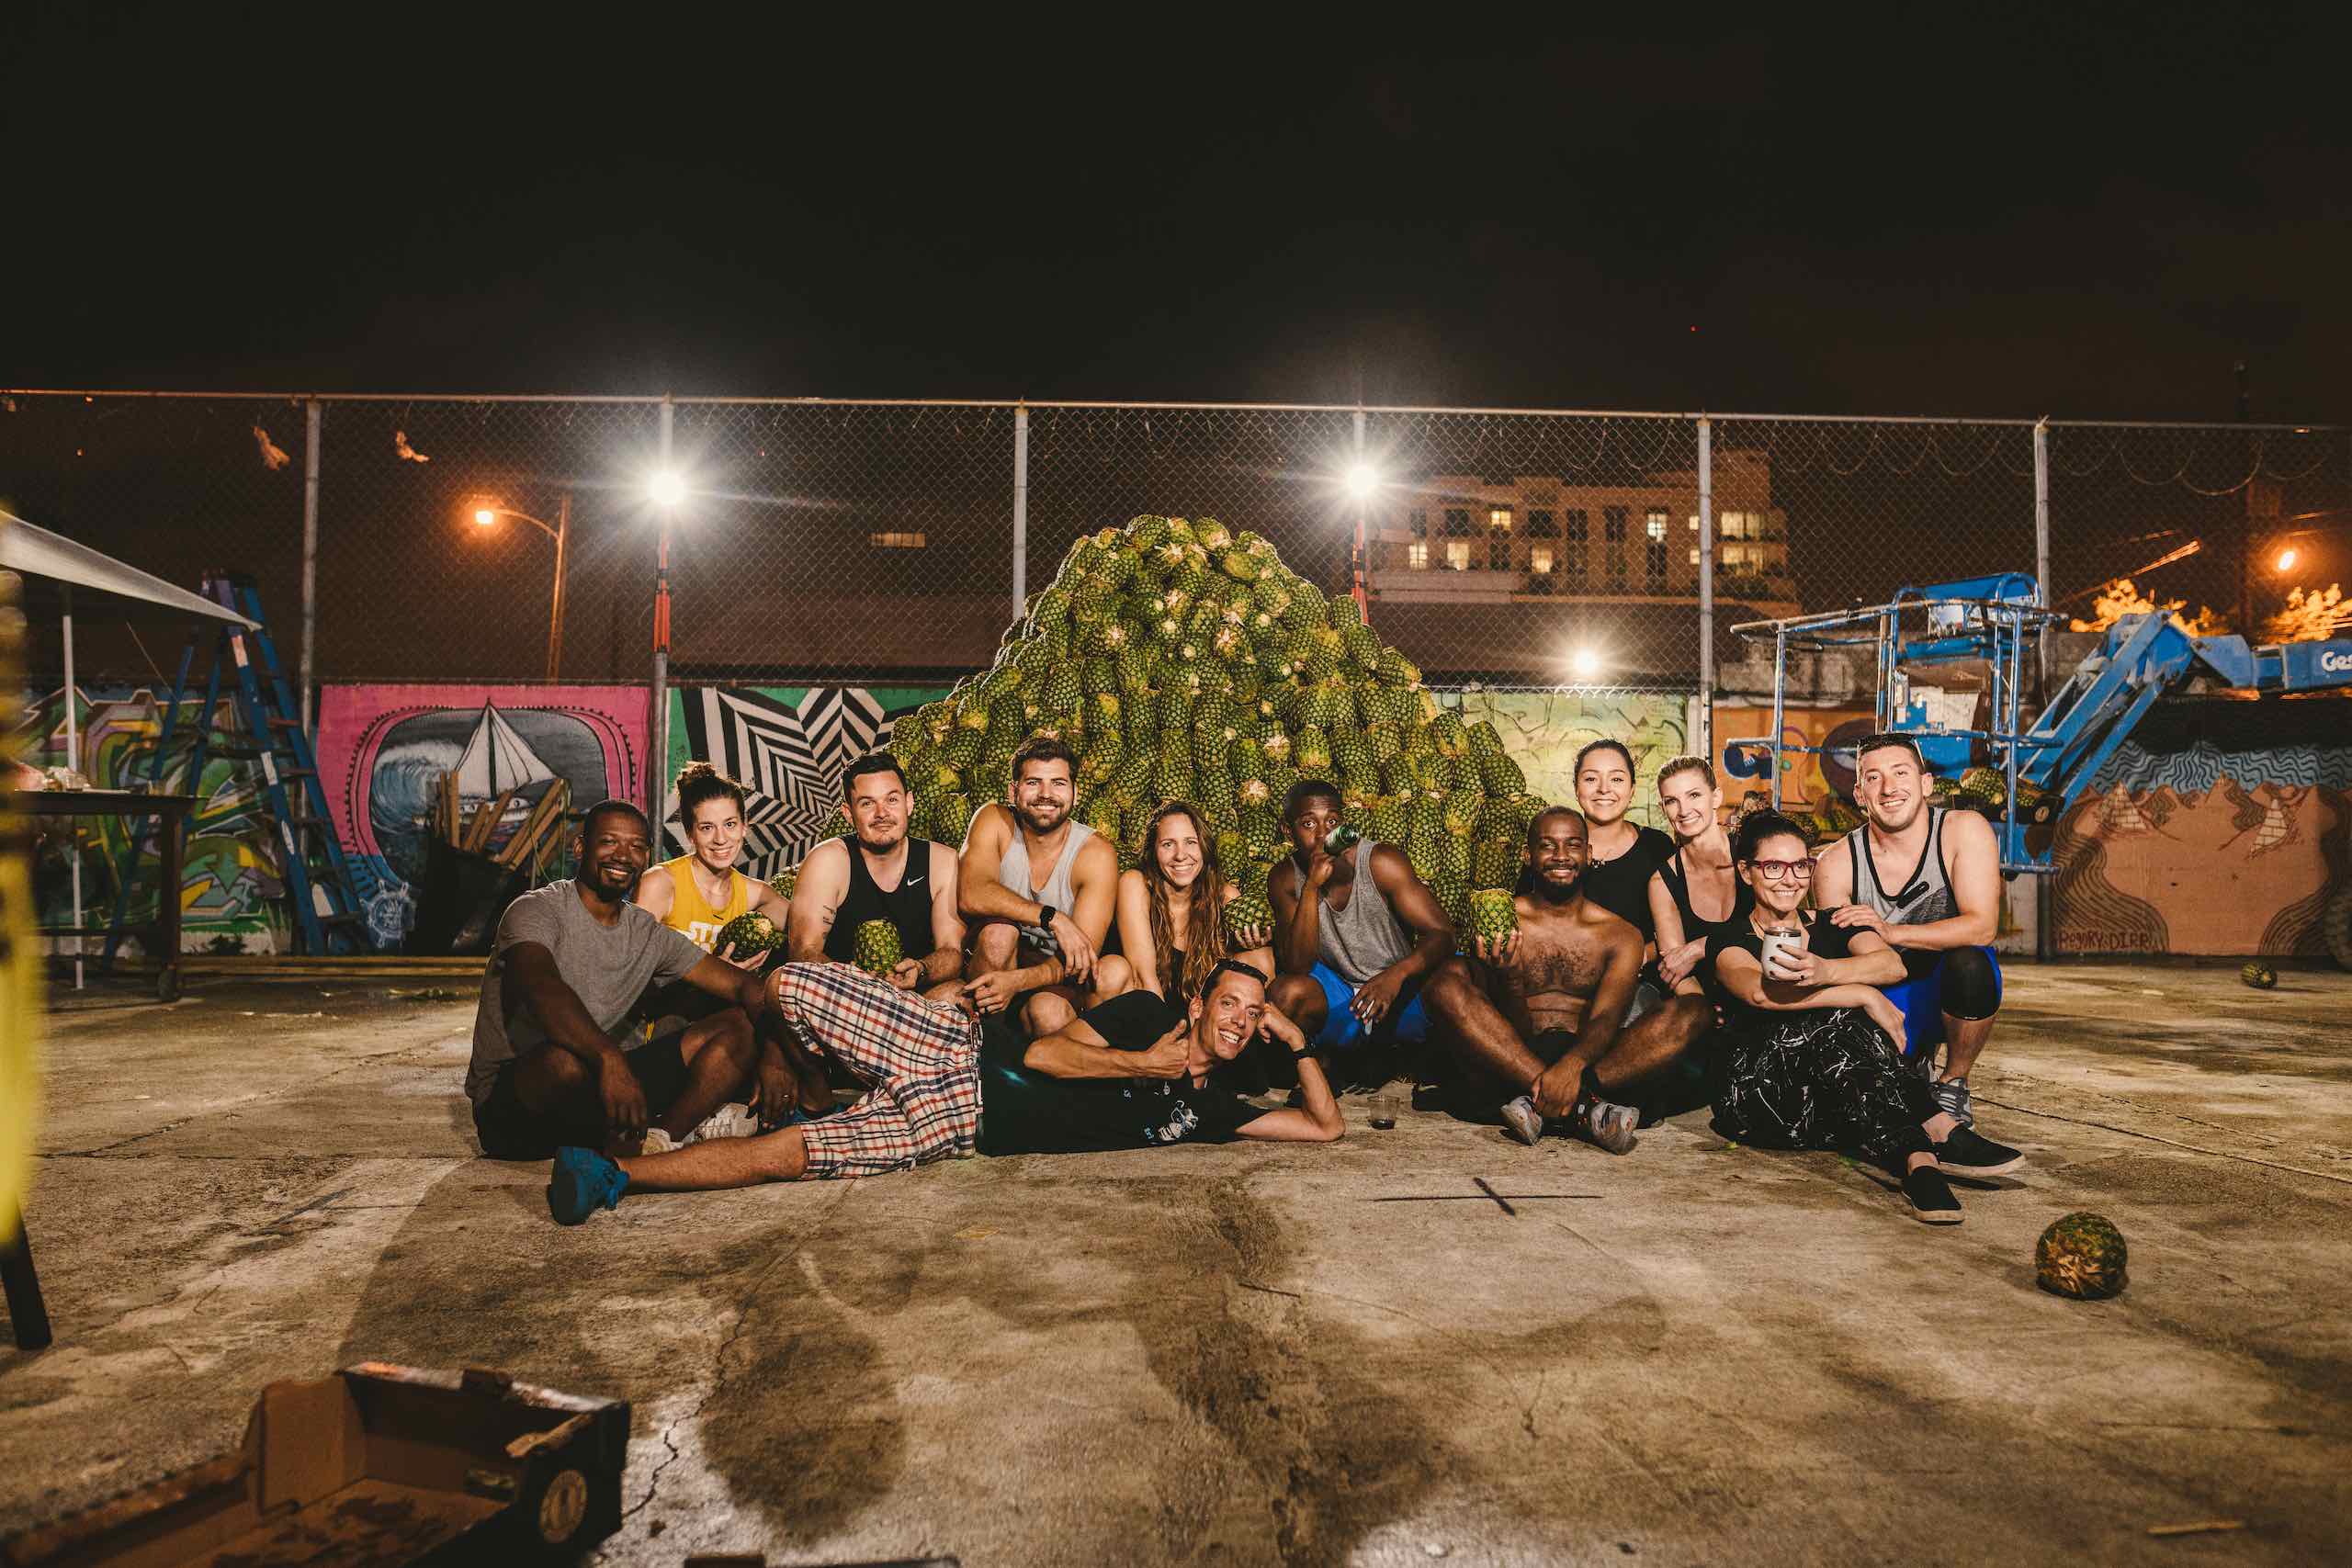 Artwalk 2018 May Pineapple Pyramid display with many men and women posing in front of it at night